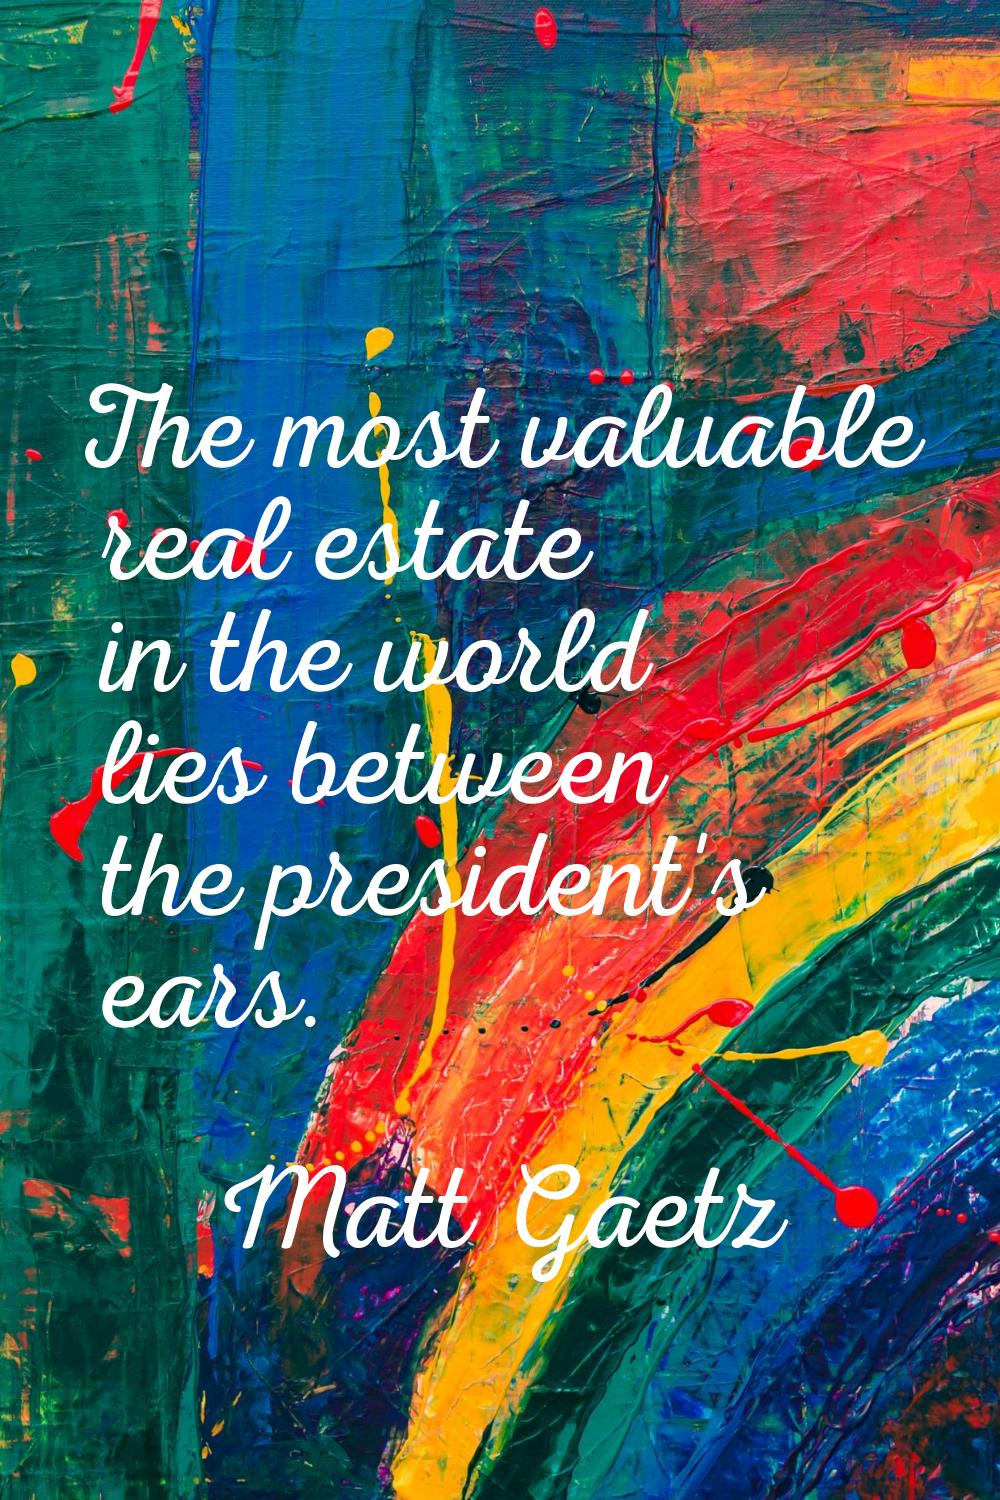 The most valuable real estate in the world lies between the president's ears.